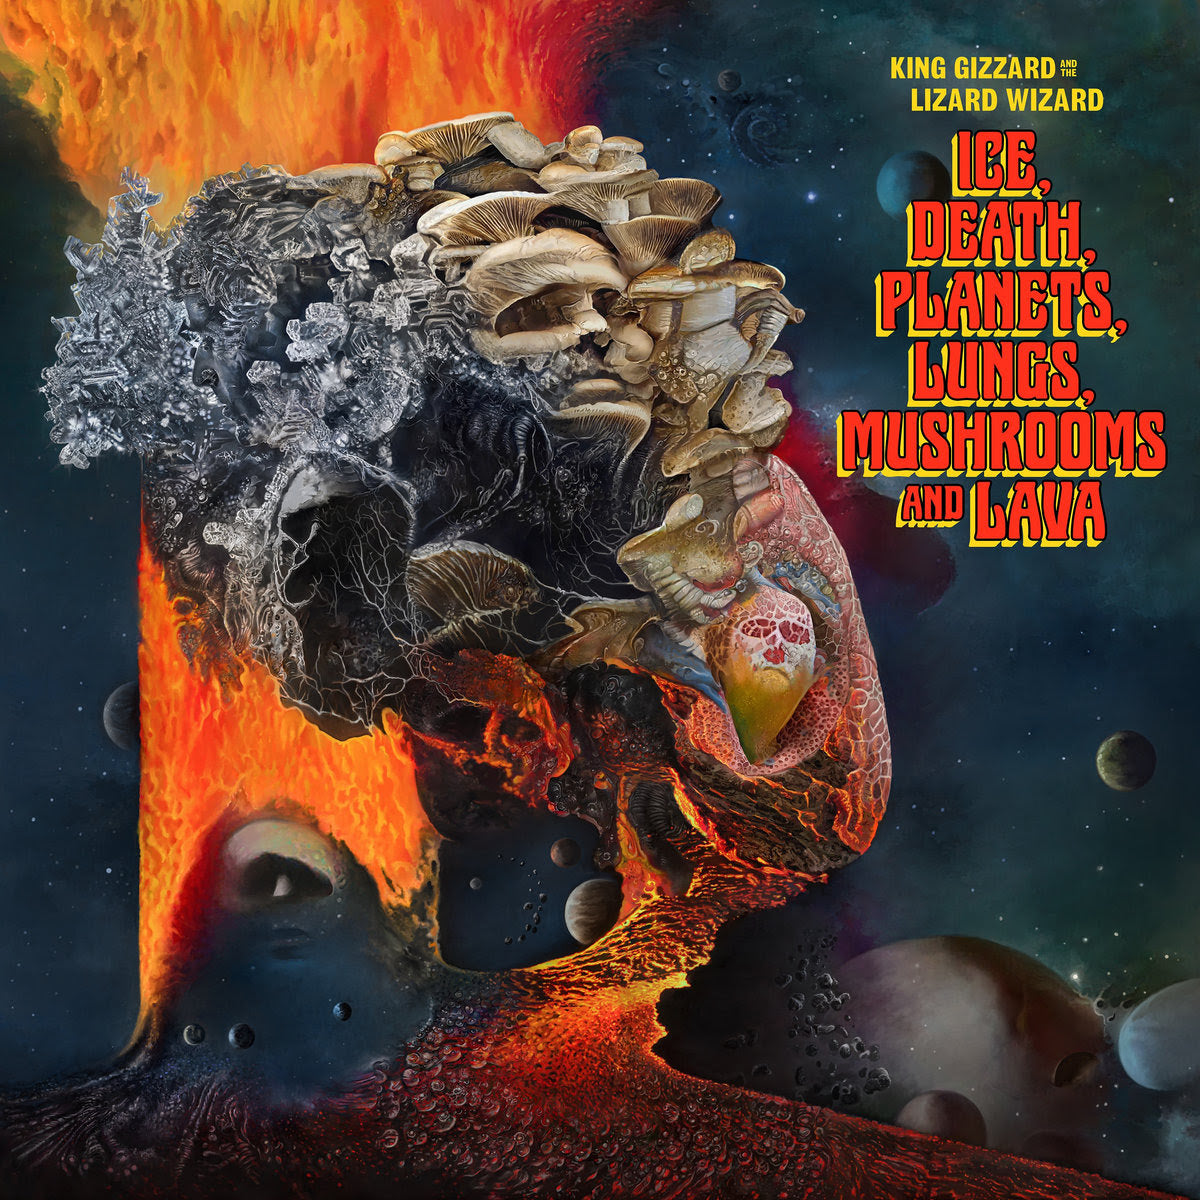 King Gizzard & The Lizard Wizard - Ice, Death, Planets, Lungs, Mushrooms And Lava | Buy the Vinyl LP